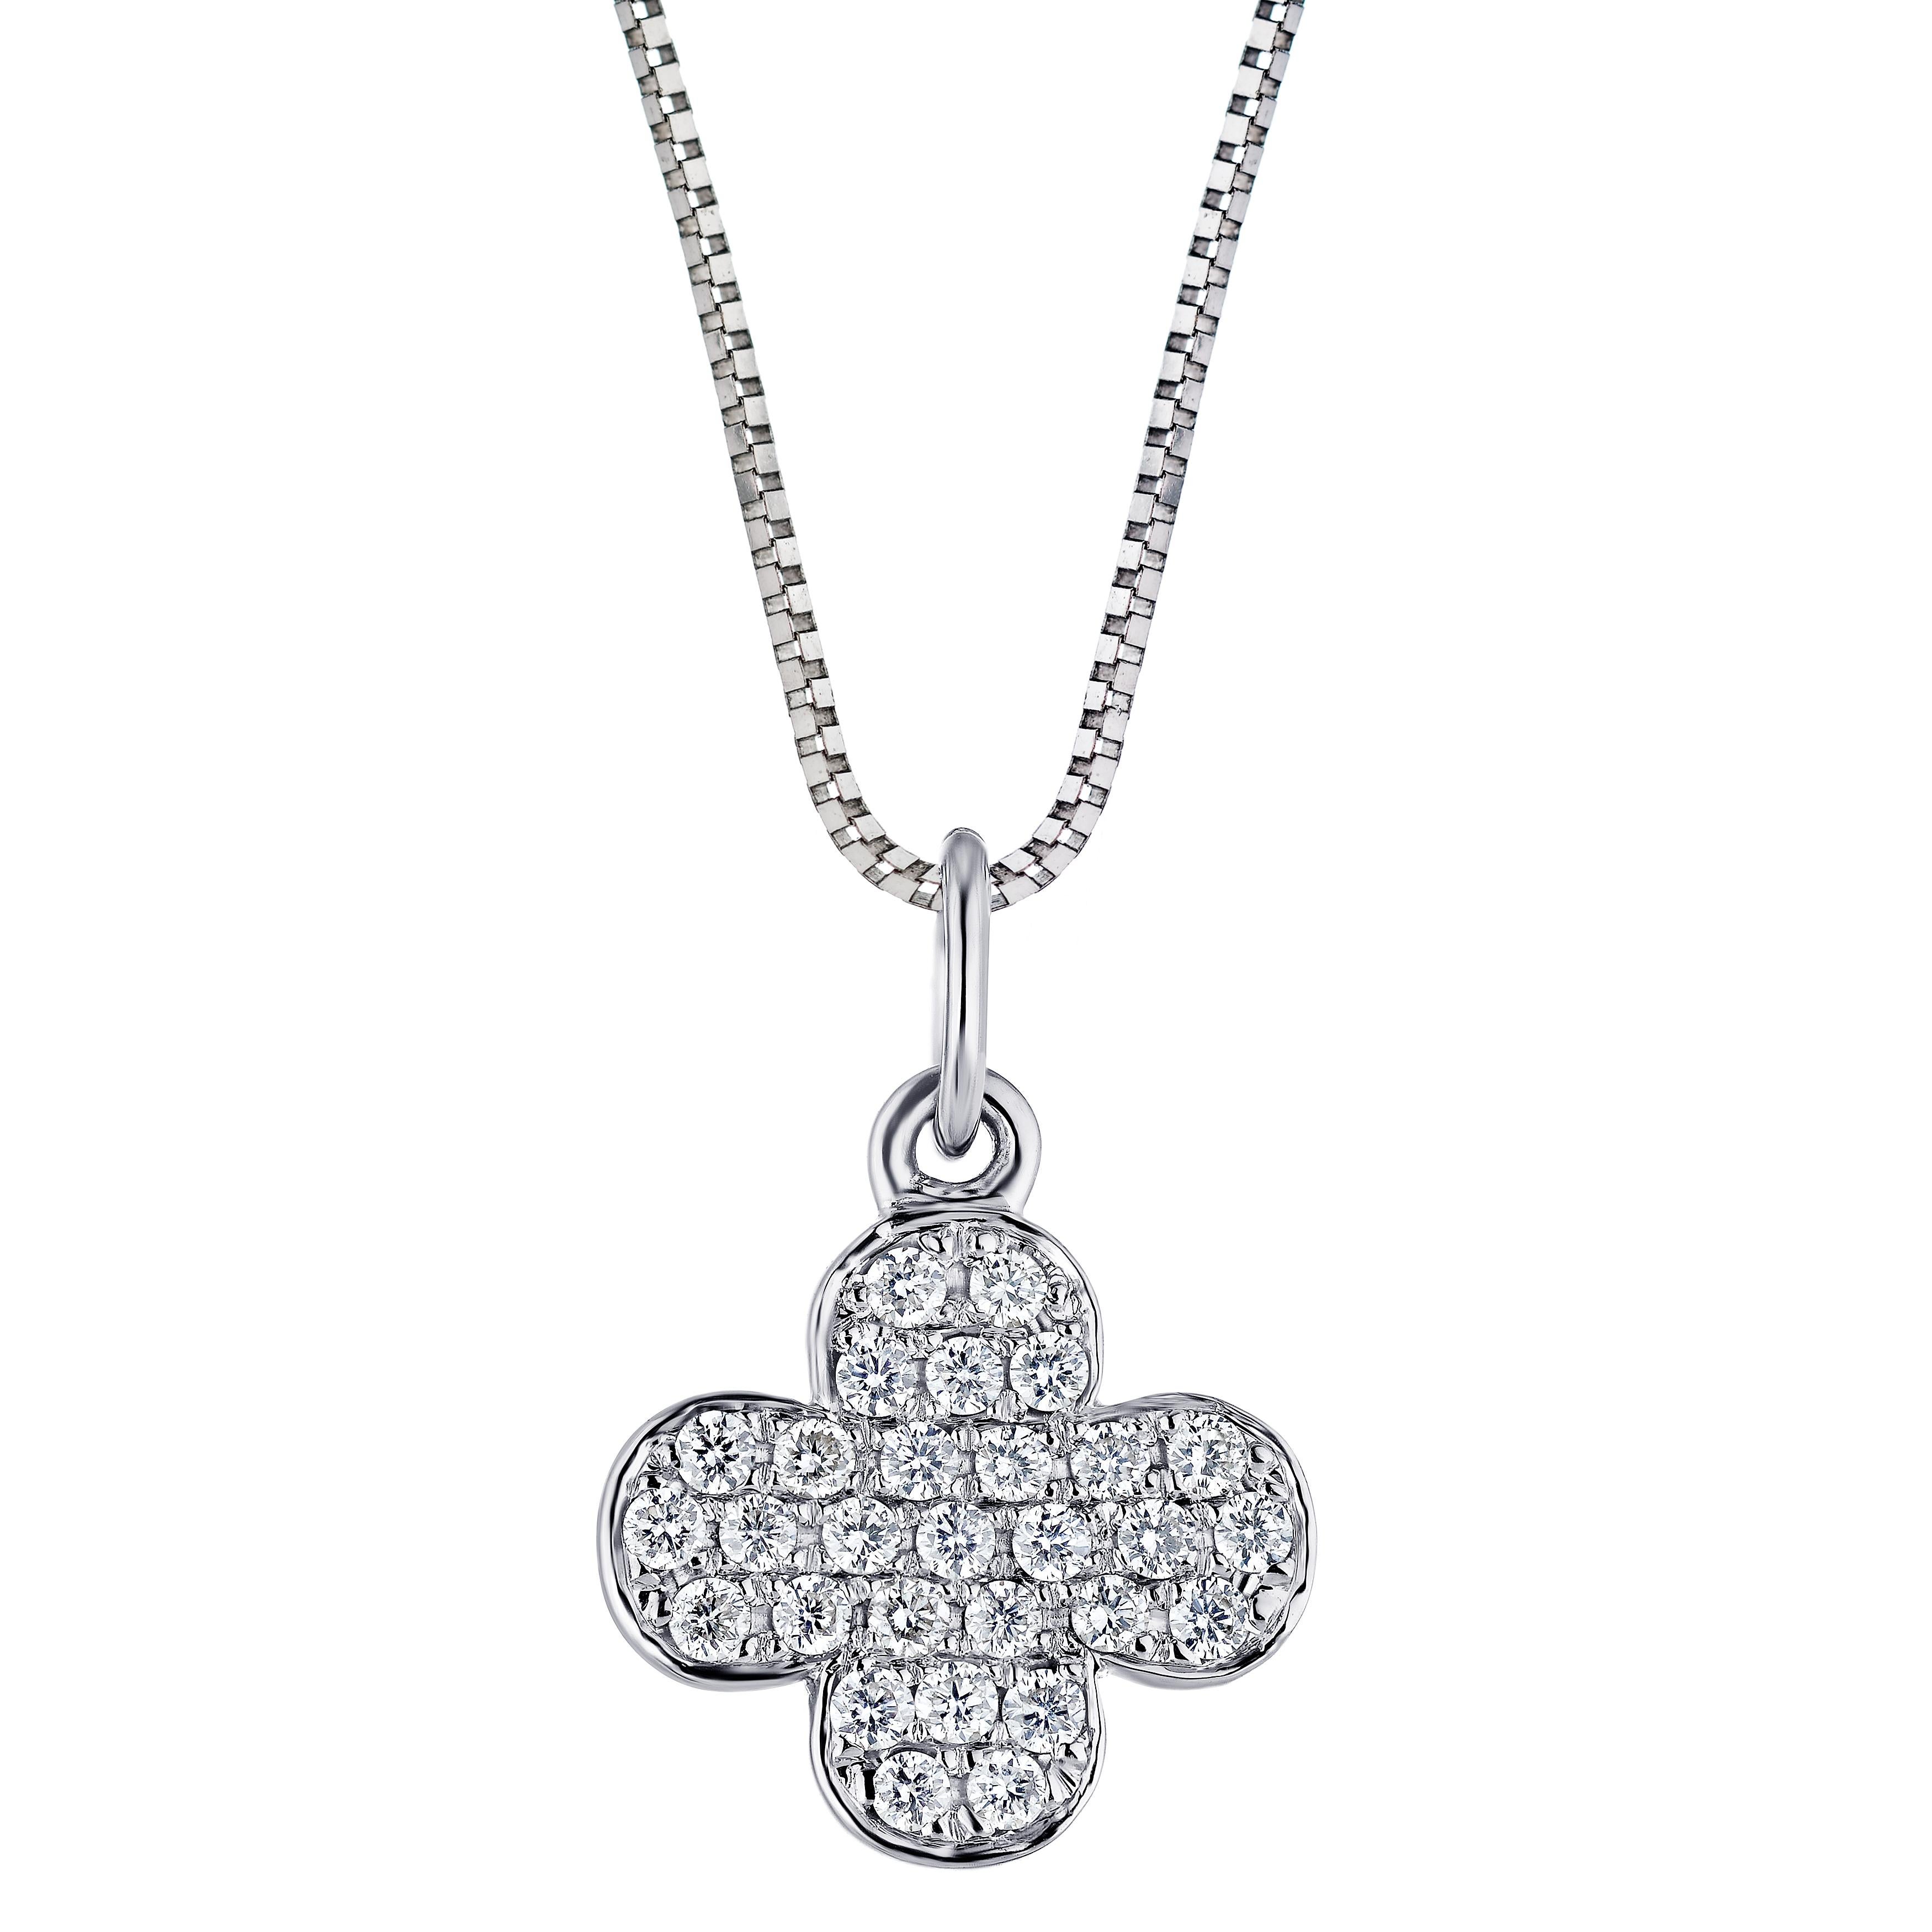 Timeless diamond flower pendant design
14 white gold with sparkling 1/2 carat total round stones
Pendant suspends from an 18 inch chain

